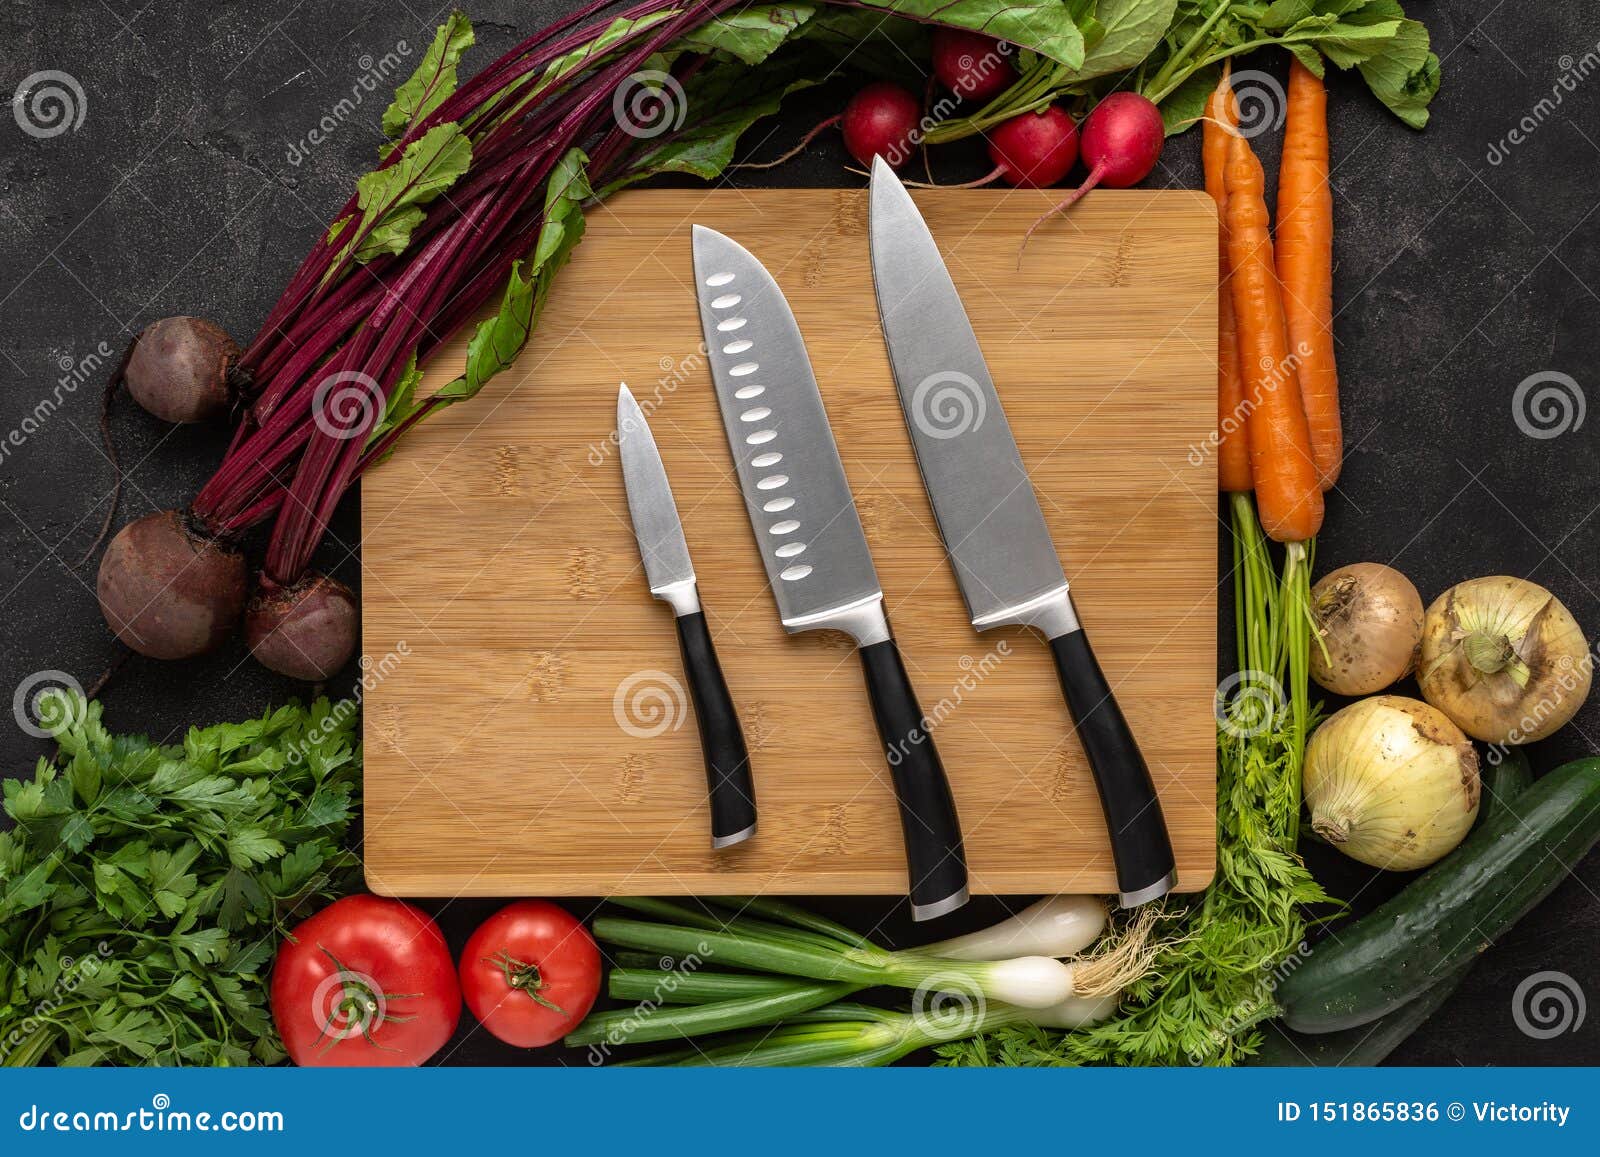 kitchen knives on wooden chopping board with fresh vegetables background. vegetarian raw food.